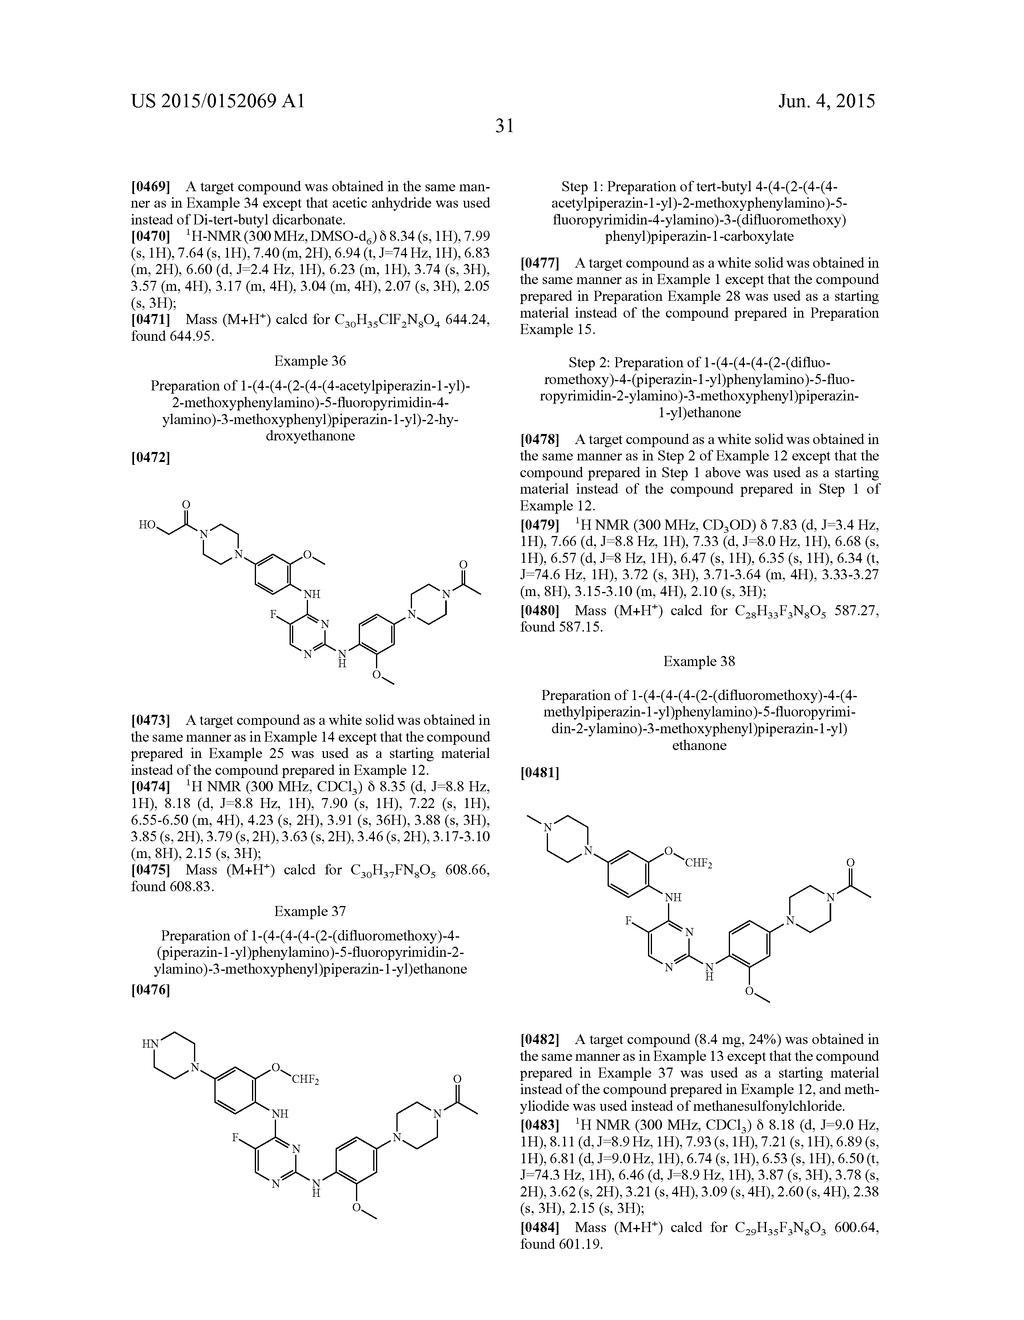 N2,N4-BIS(4-(PIPERAZINE-1-YL)PHENYL)PIRIMIDINE-2,4-DIAMINE DERIVATIVE OR     PHARMACEUTICALLY ACCEPTABLE SALT THEREOF, AND COMPOSITION CONTAINING SAME     AS ACTIVE INGREDIENT FOR PREVENTING OR TREATING CANCER - diagram, schematic, and image 35